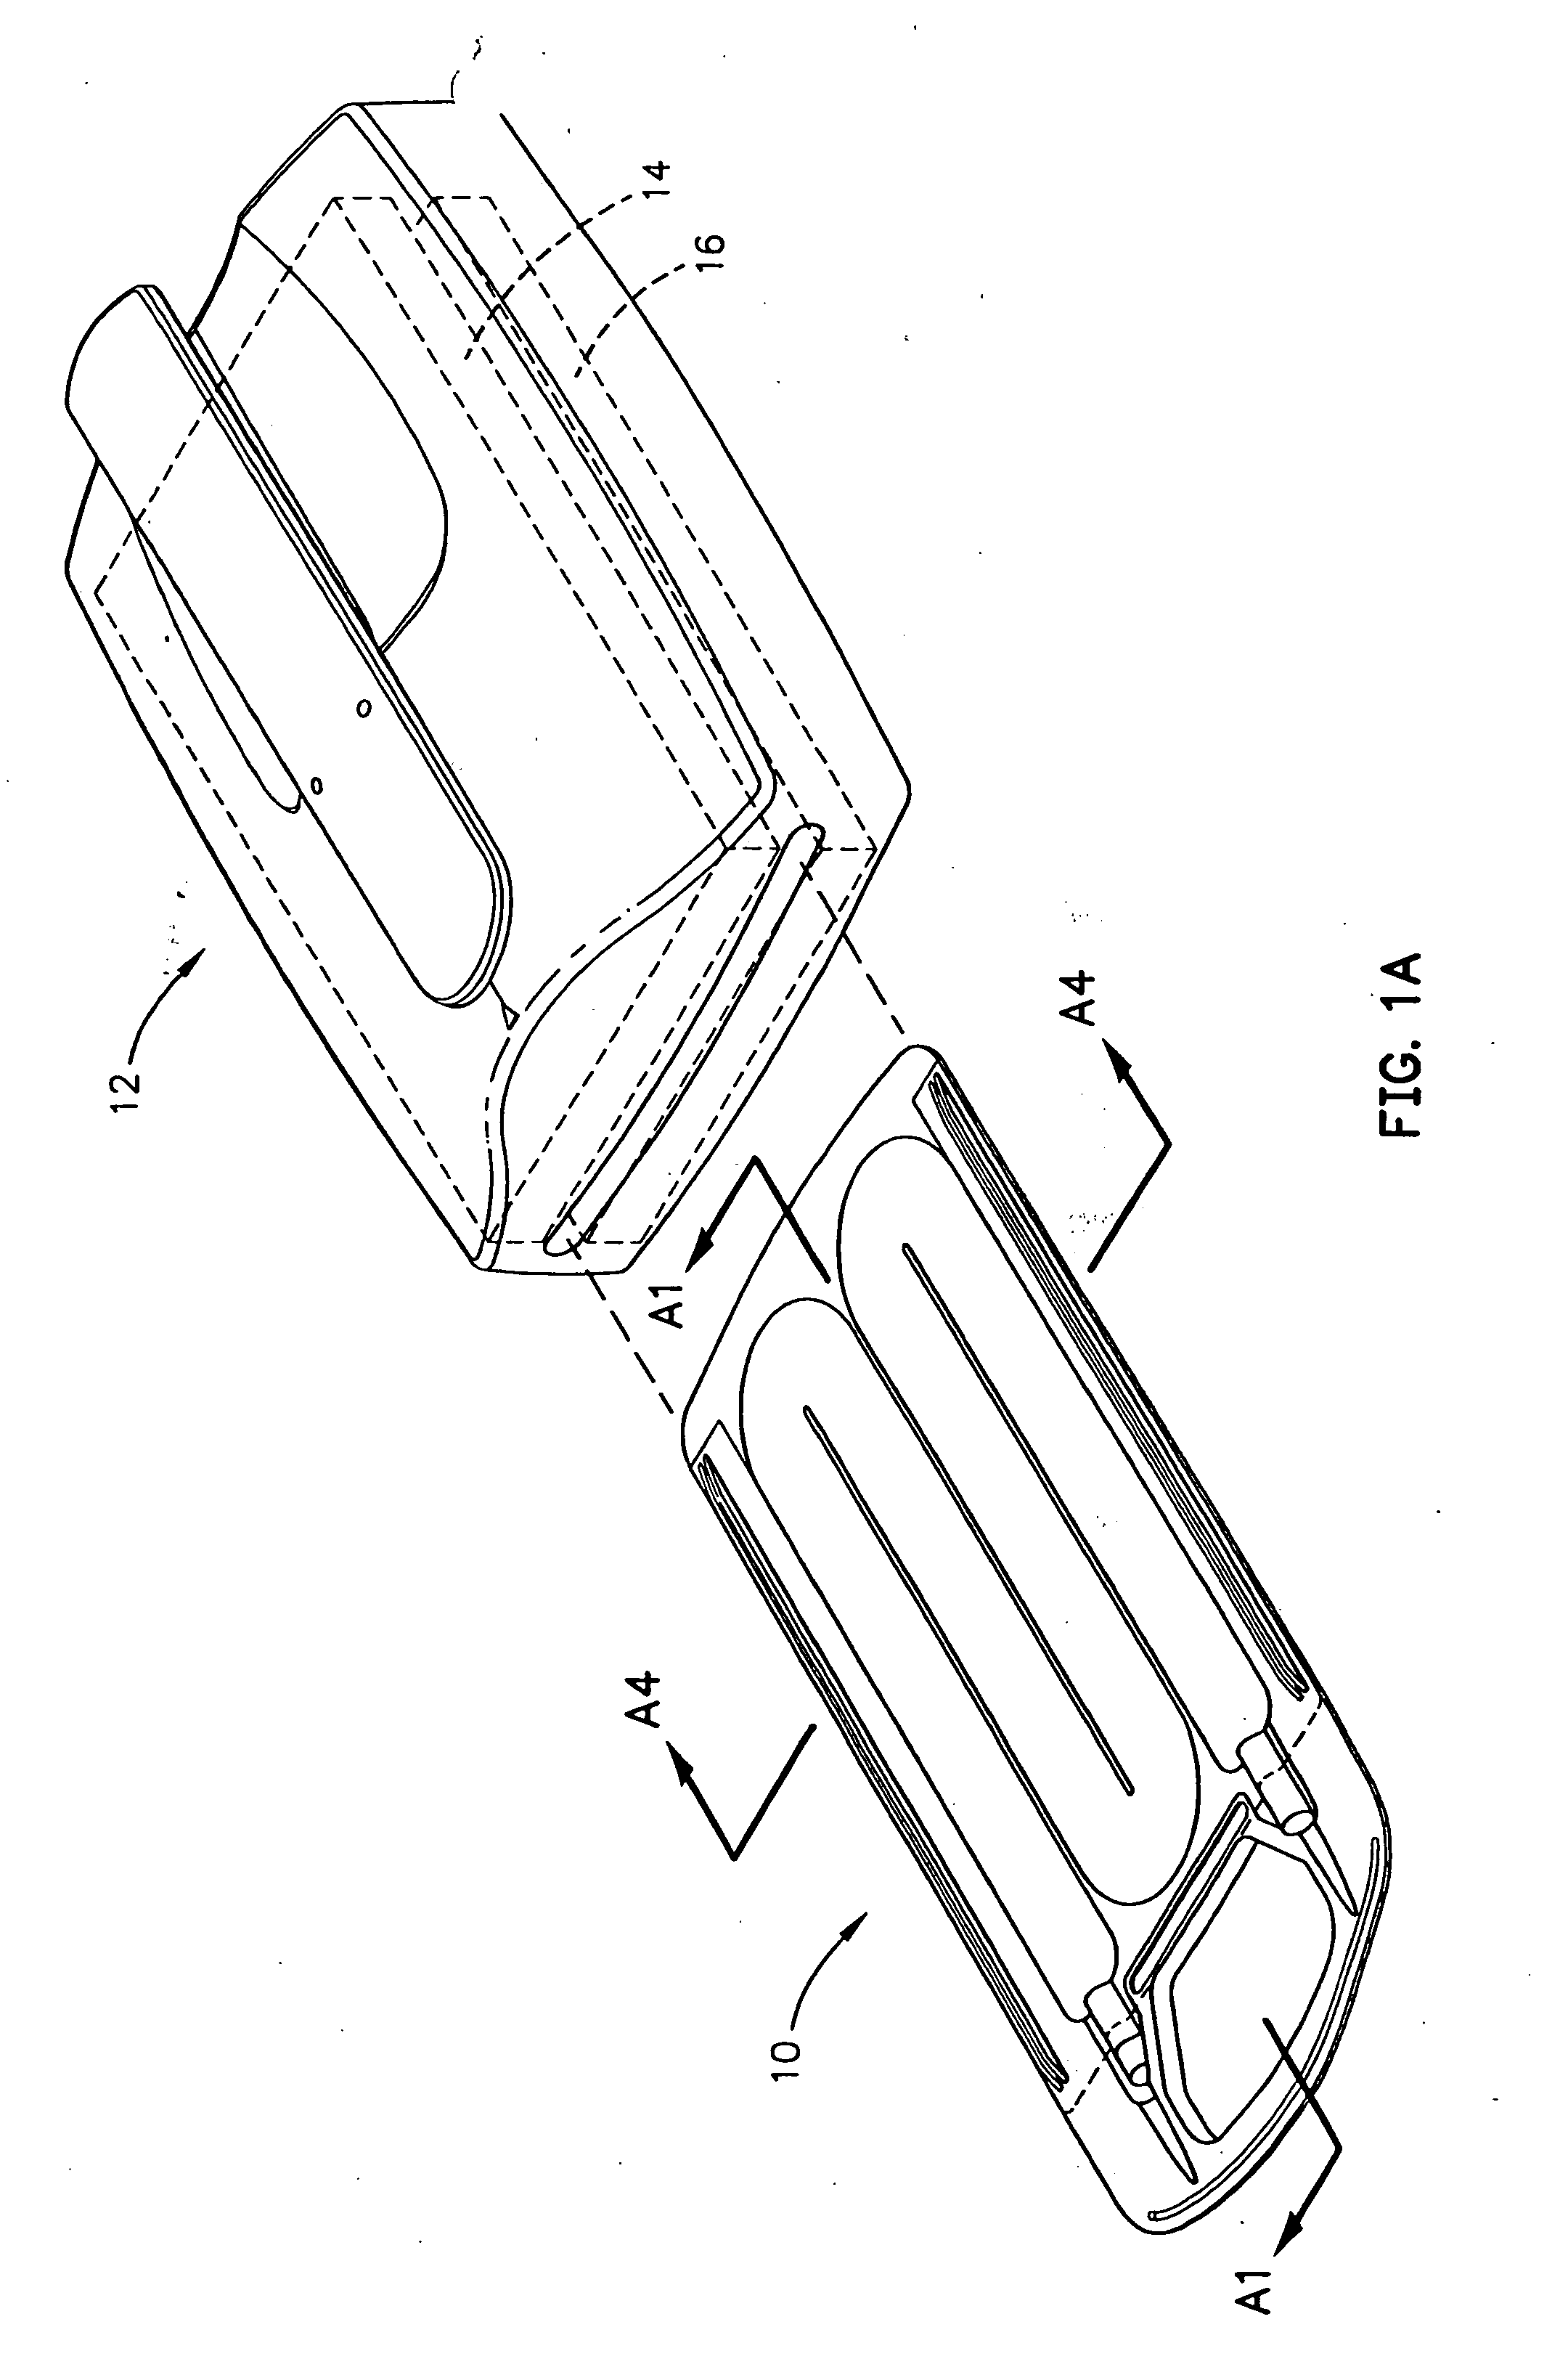 Intravenous fluid warming cassette with stiffening member and integral handle